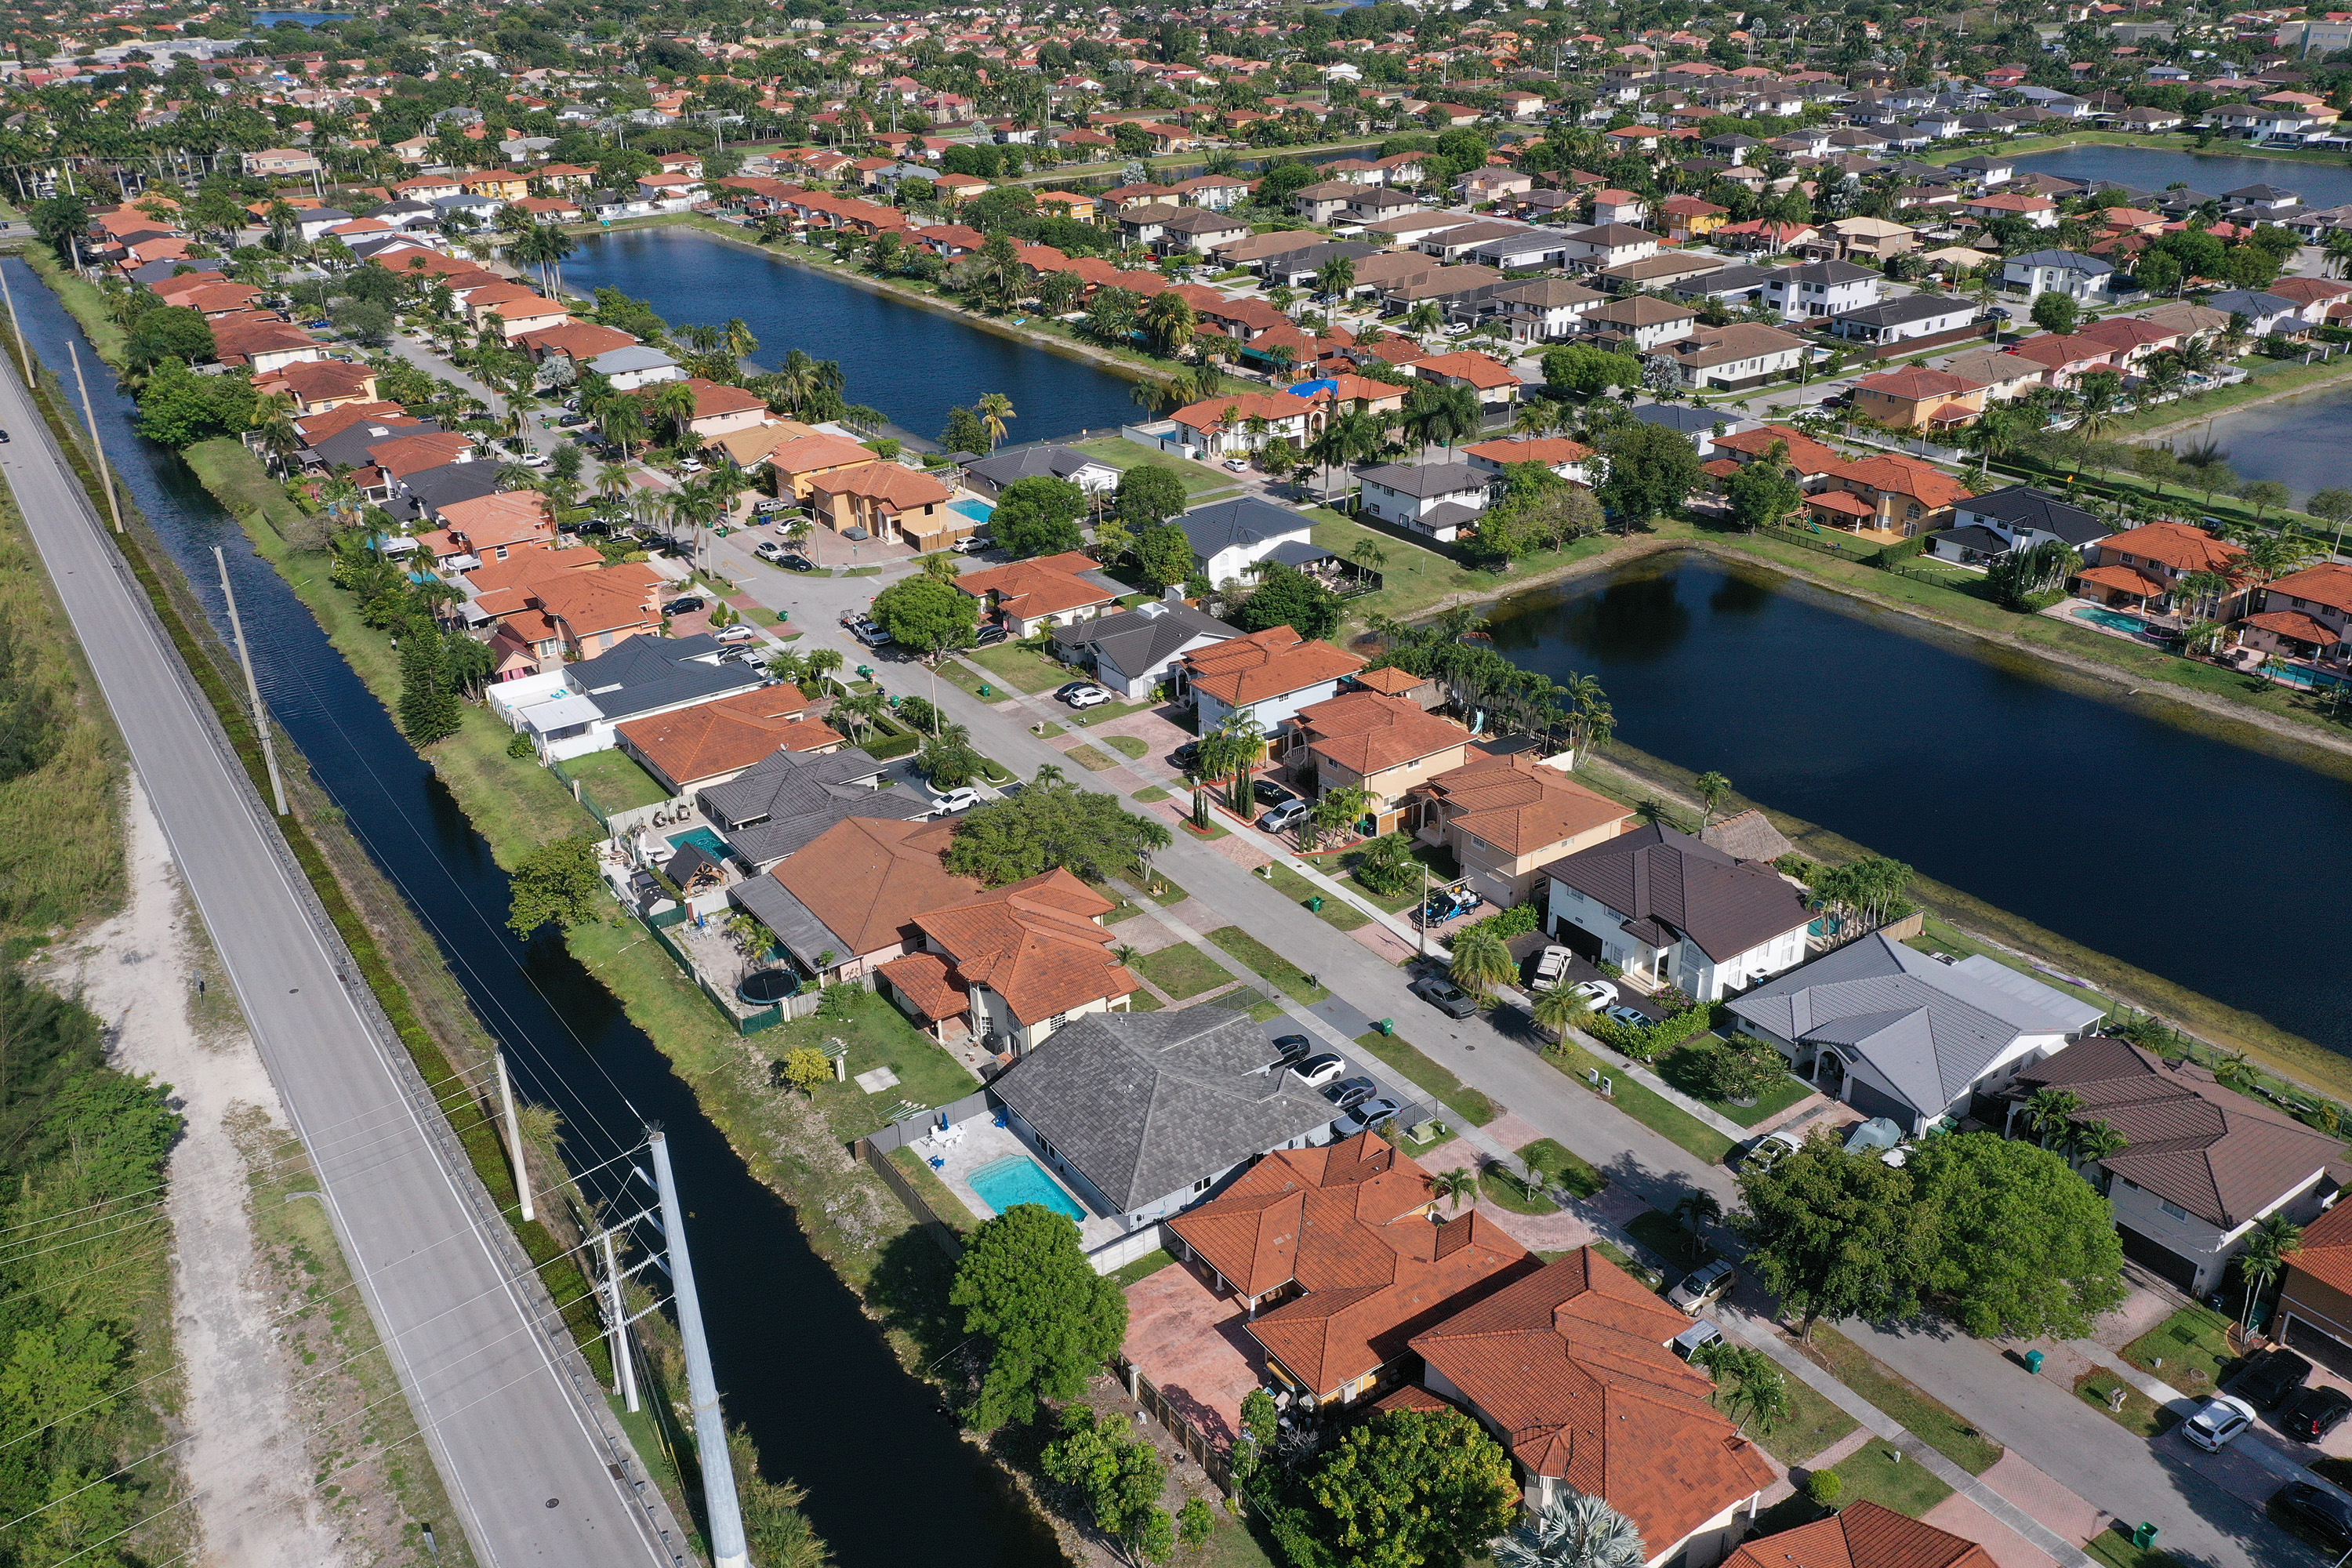 Florida housing market ‘at risk’ in 13 different cities